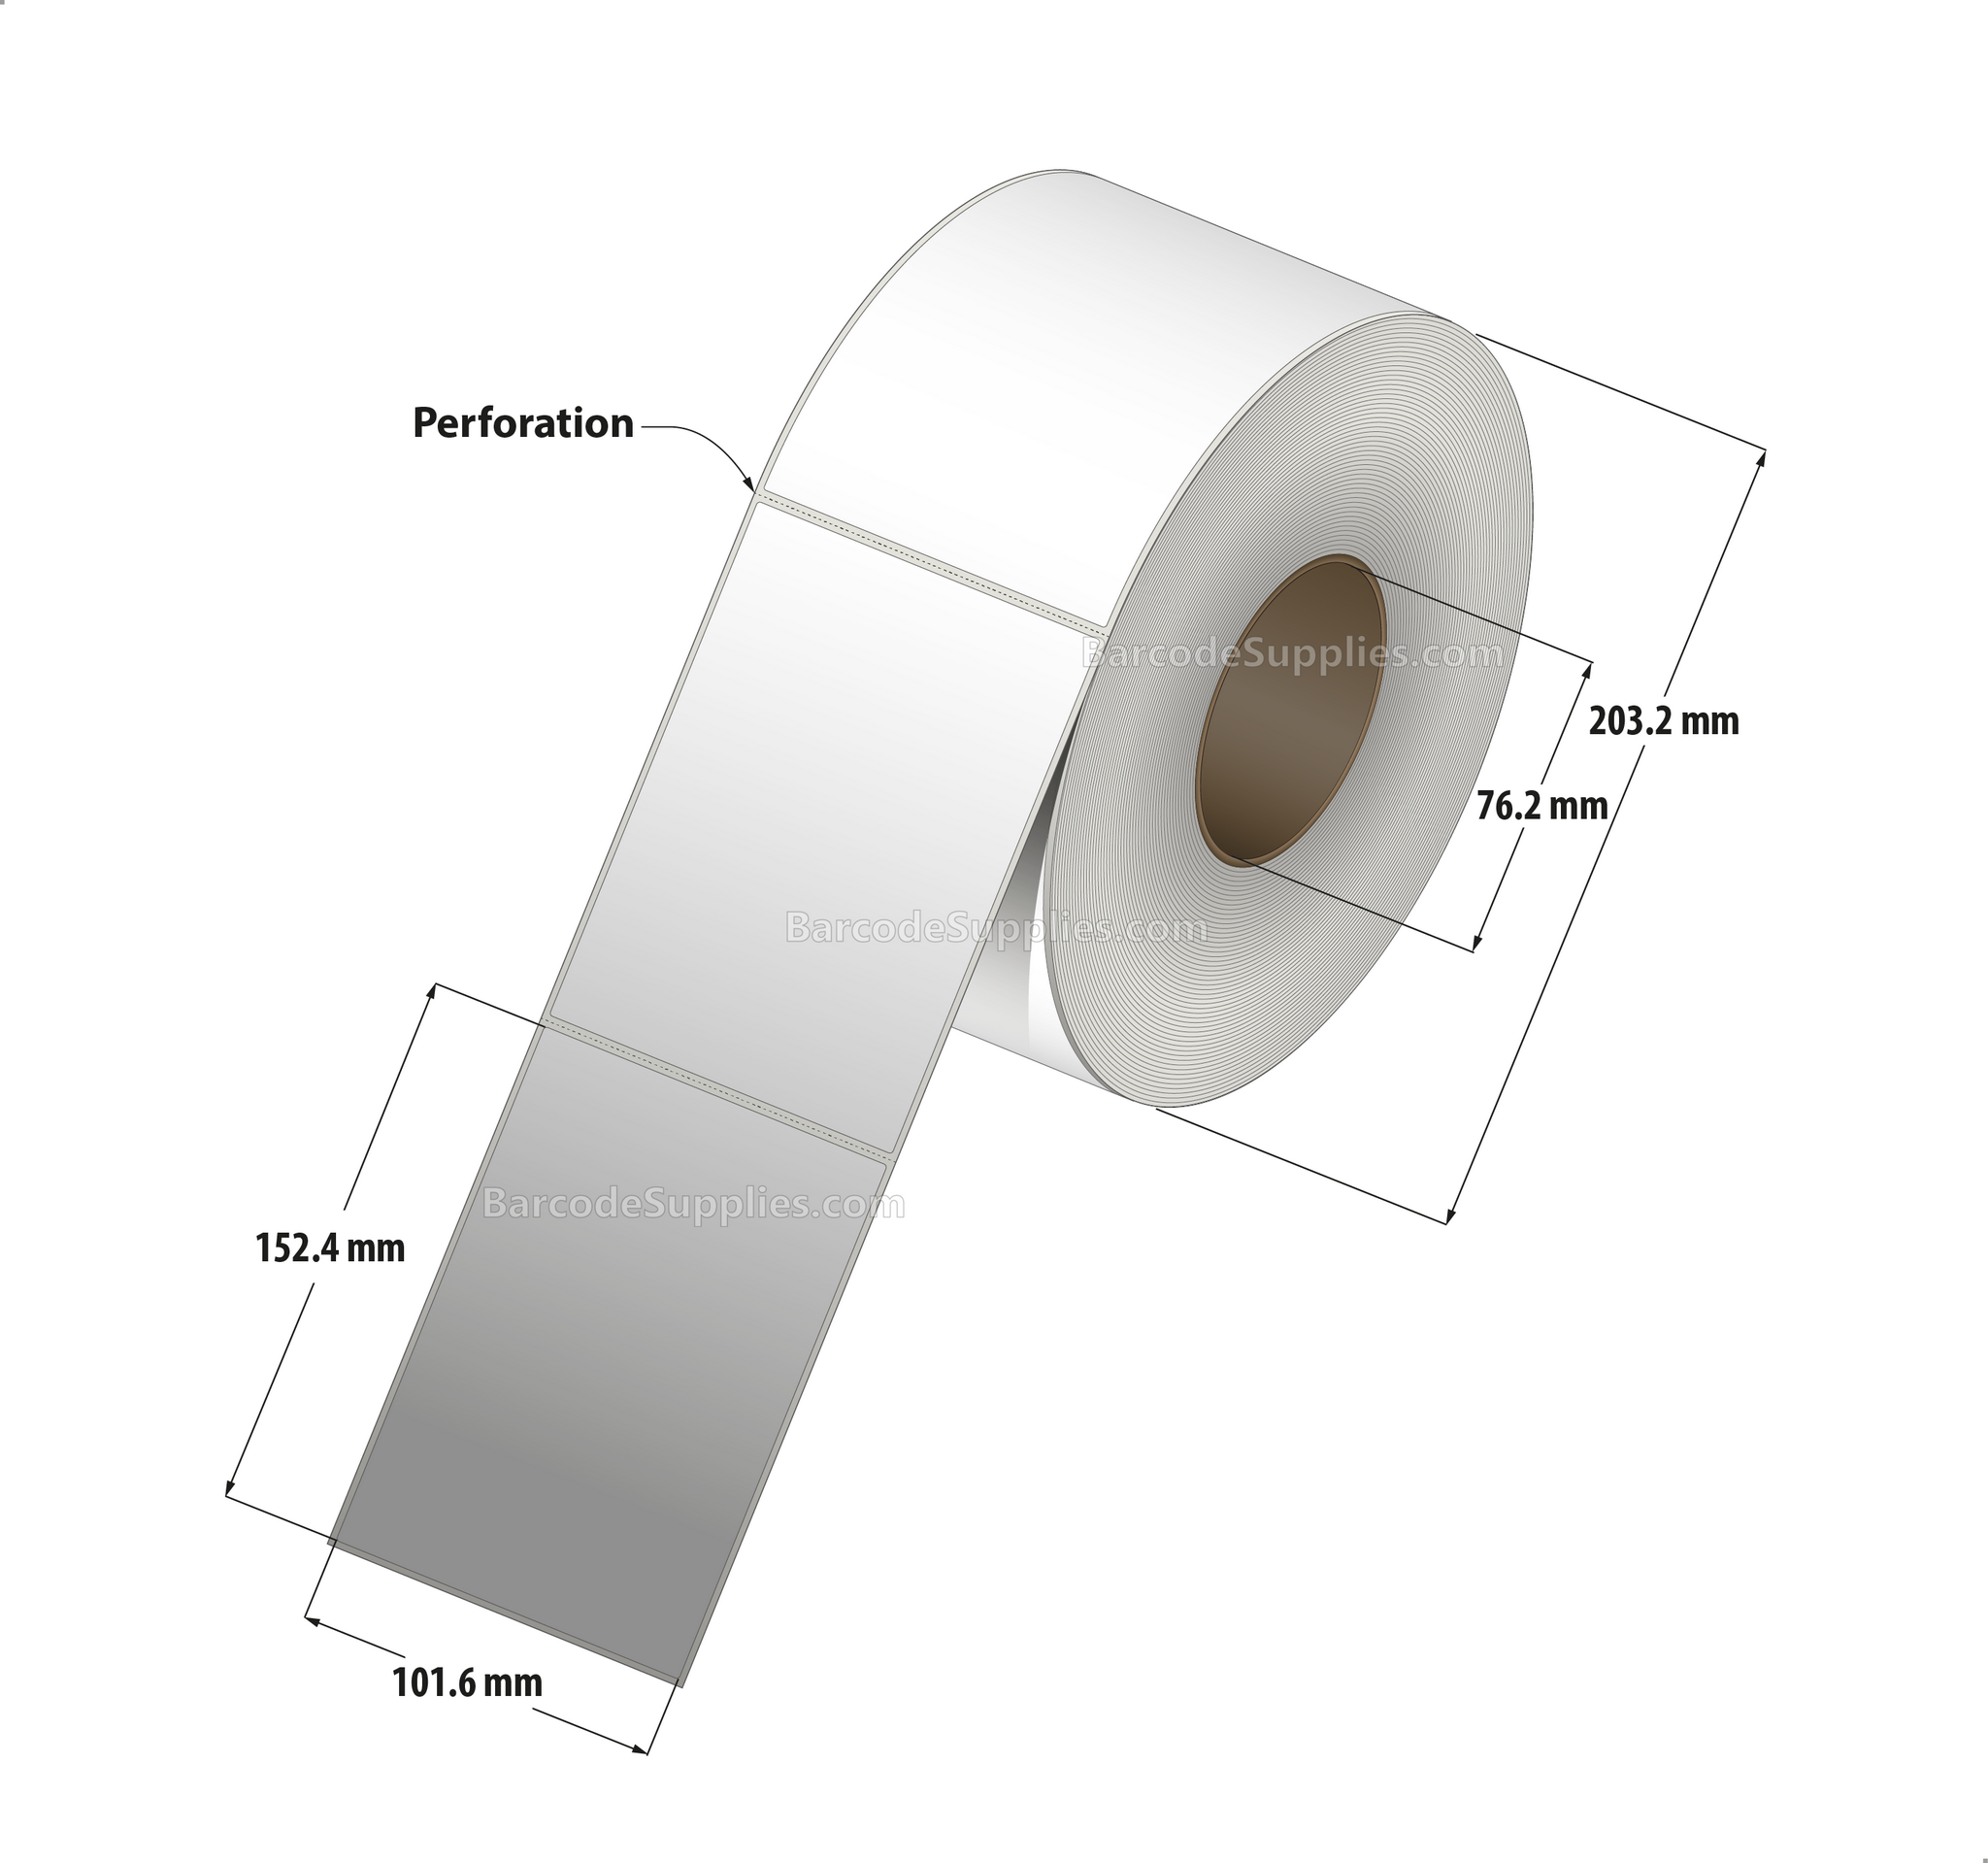 4 x 6 Direct Thermal White Labels With Permanent Acrylic Adhesive - Perforated - 1000 Labels Per Roll - Carton Of 4 Rolls - 4000 Labels Total - MPN: DT46-1